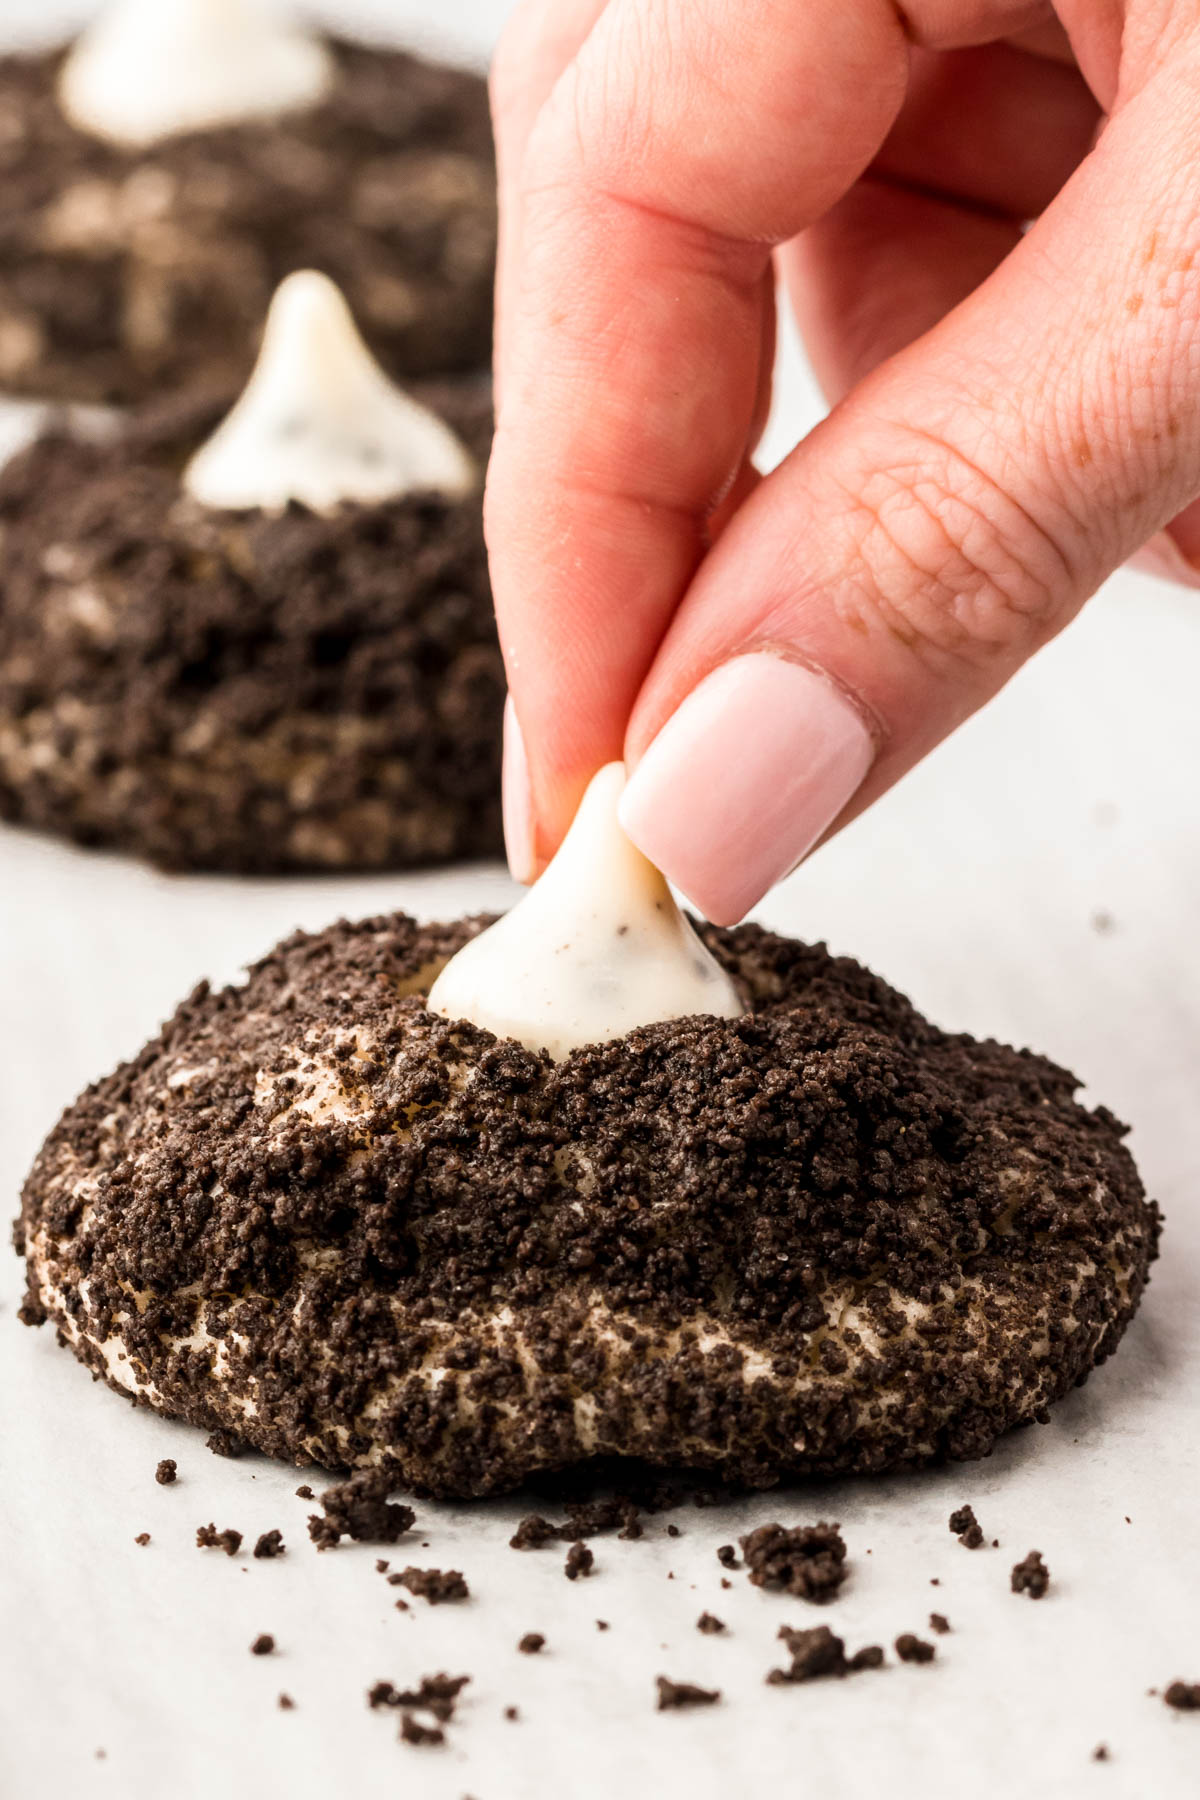 A cookies and cream Hershey Kiss being pressed into an Oreo crumb covered cookies.